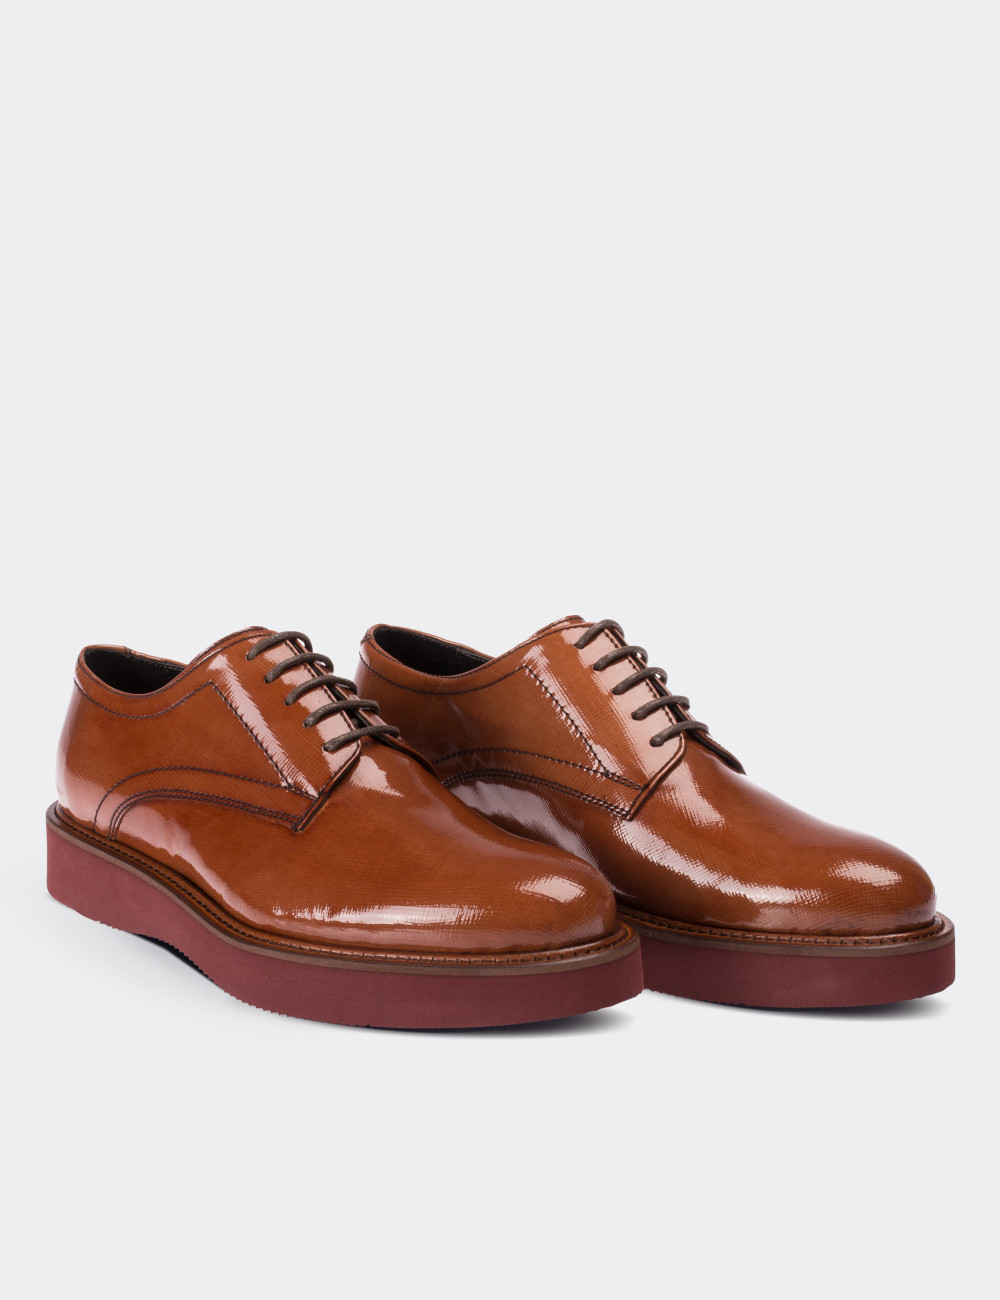 Tan Patent Leather Lace-up Shoes - Deery